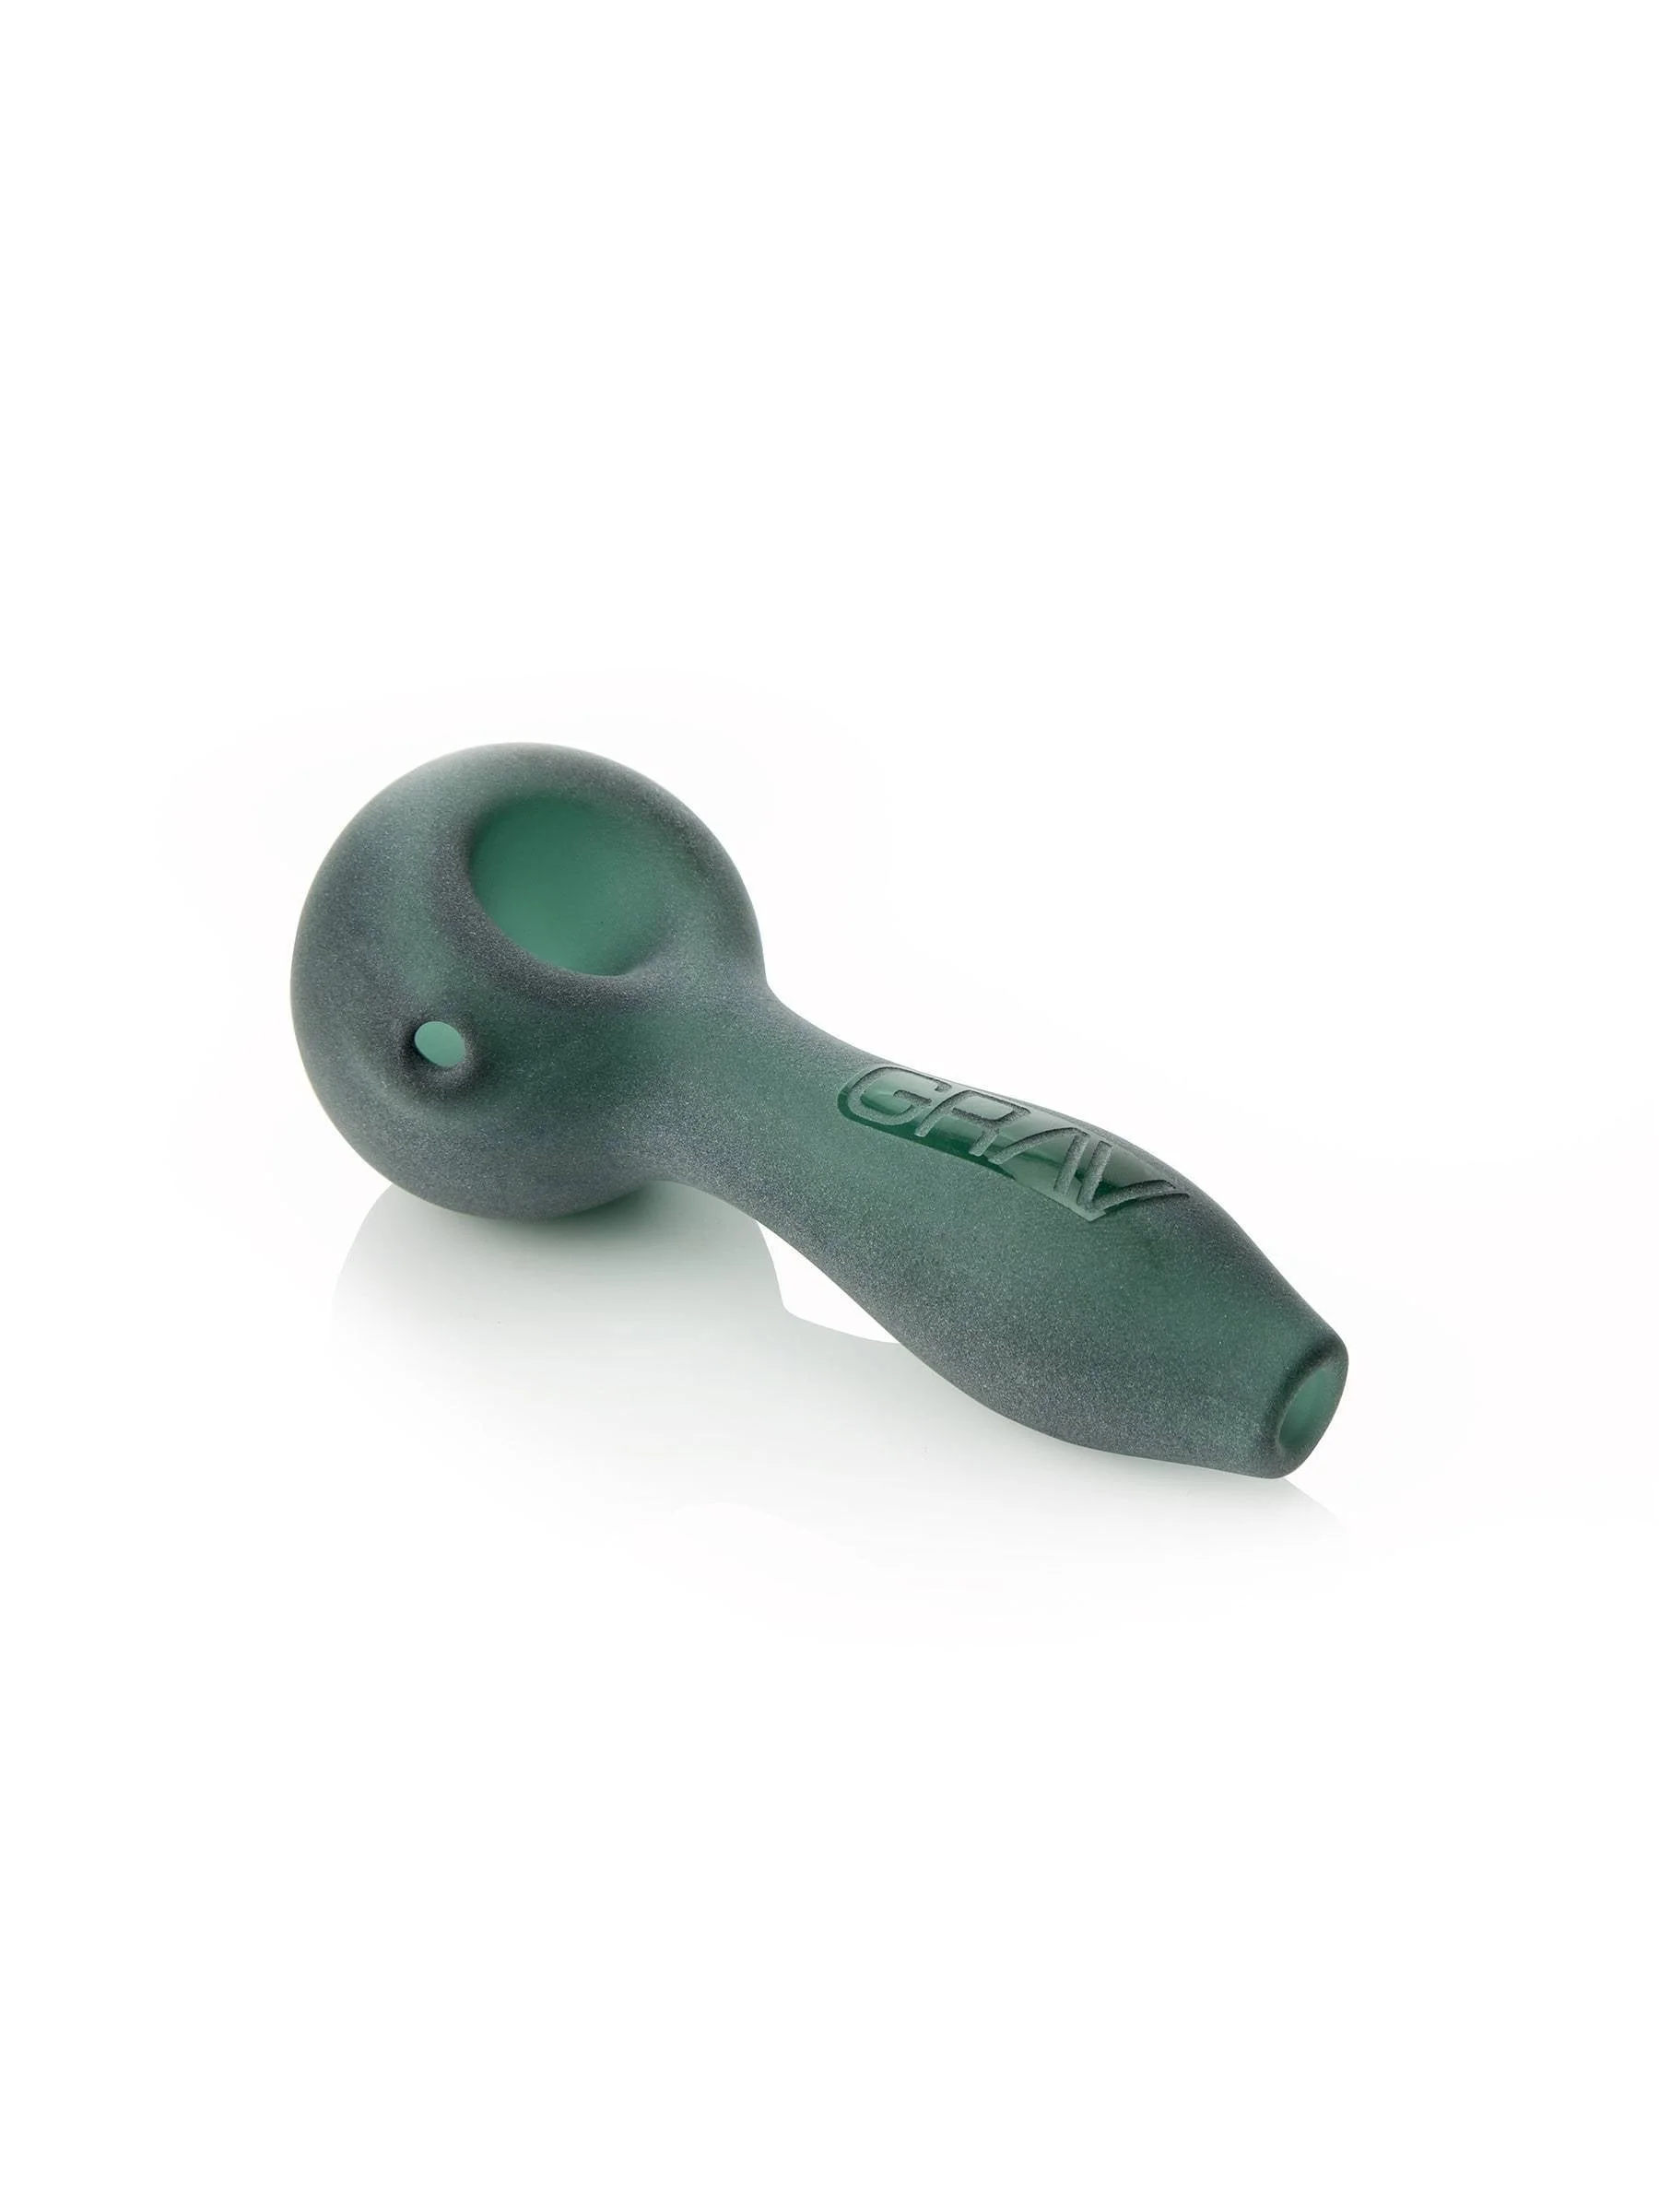 A green, handheld glass smoking pipe isolated on a white background.